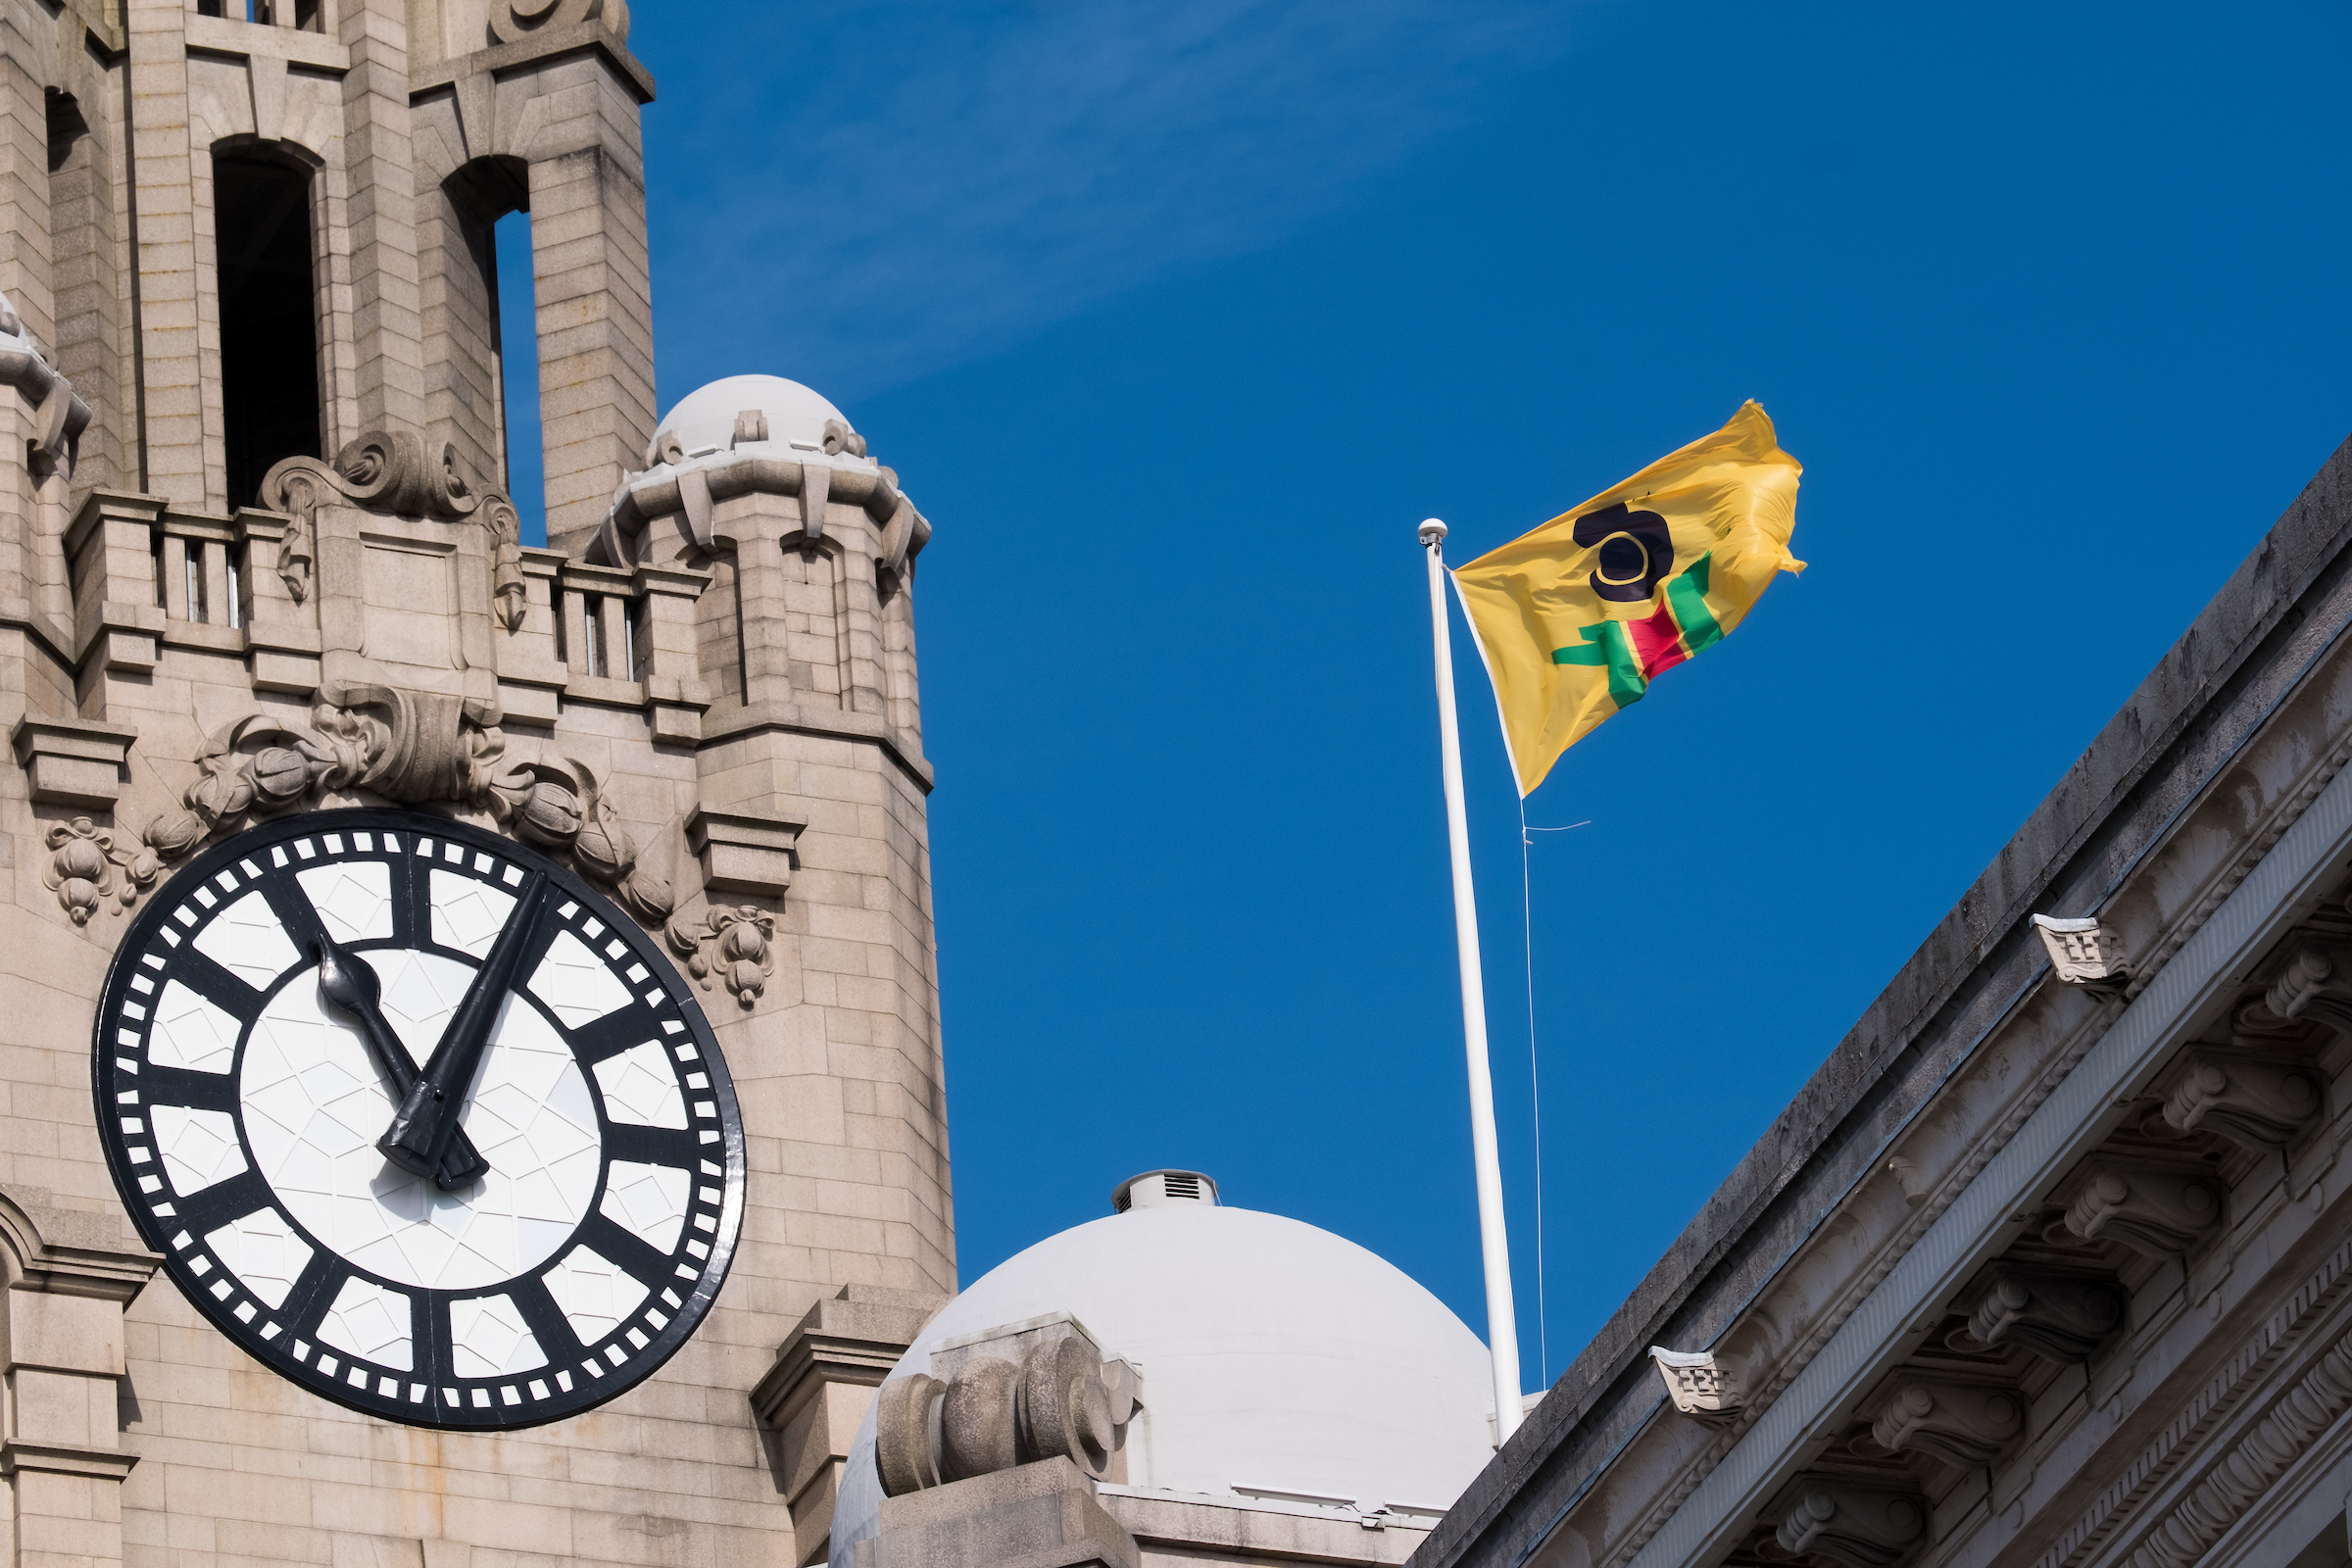 The yellow flag with green, red and black blocks flies against a bright blue sky next to a clock tower of the Royal Liver Building. The clock face shows the time as five past eleven. 